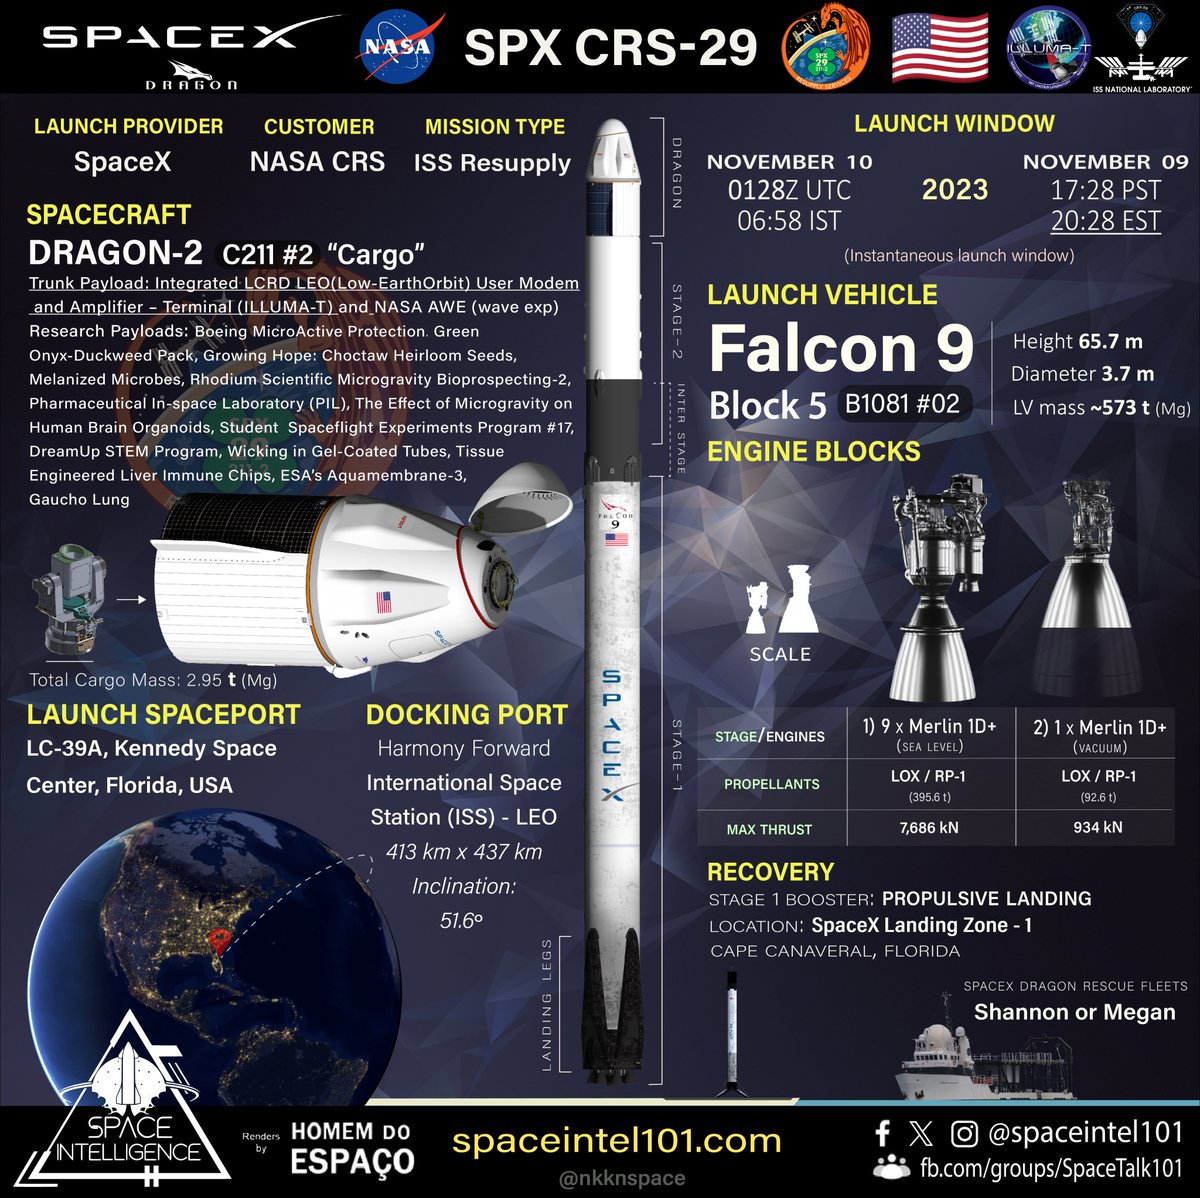 OL#6534🚀
Orbital launch no. 181 of 2023 🇺🇲🚀#91 🐲📦
#NASA & #SpaceX launching #CRS29 resupply mission to the #ISS, The Dragon spacecraft on top #Falcon9 carries scientific research payloads along with  #ILLUMAT payload stowed in trunk section to be installed on ISS.